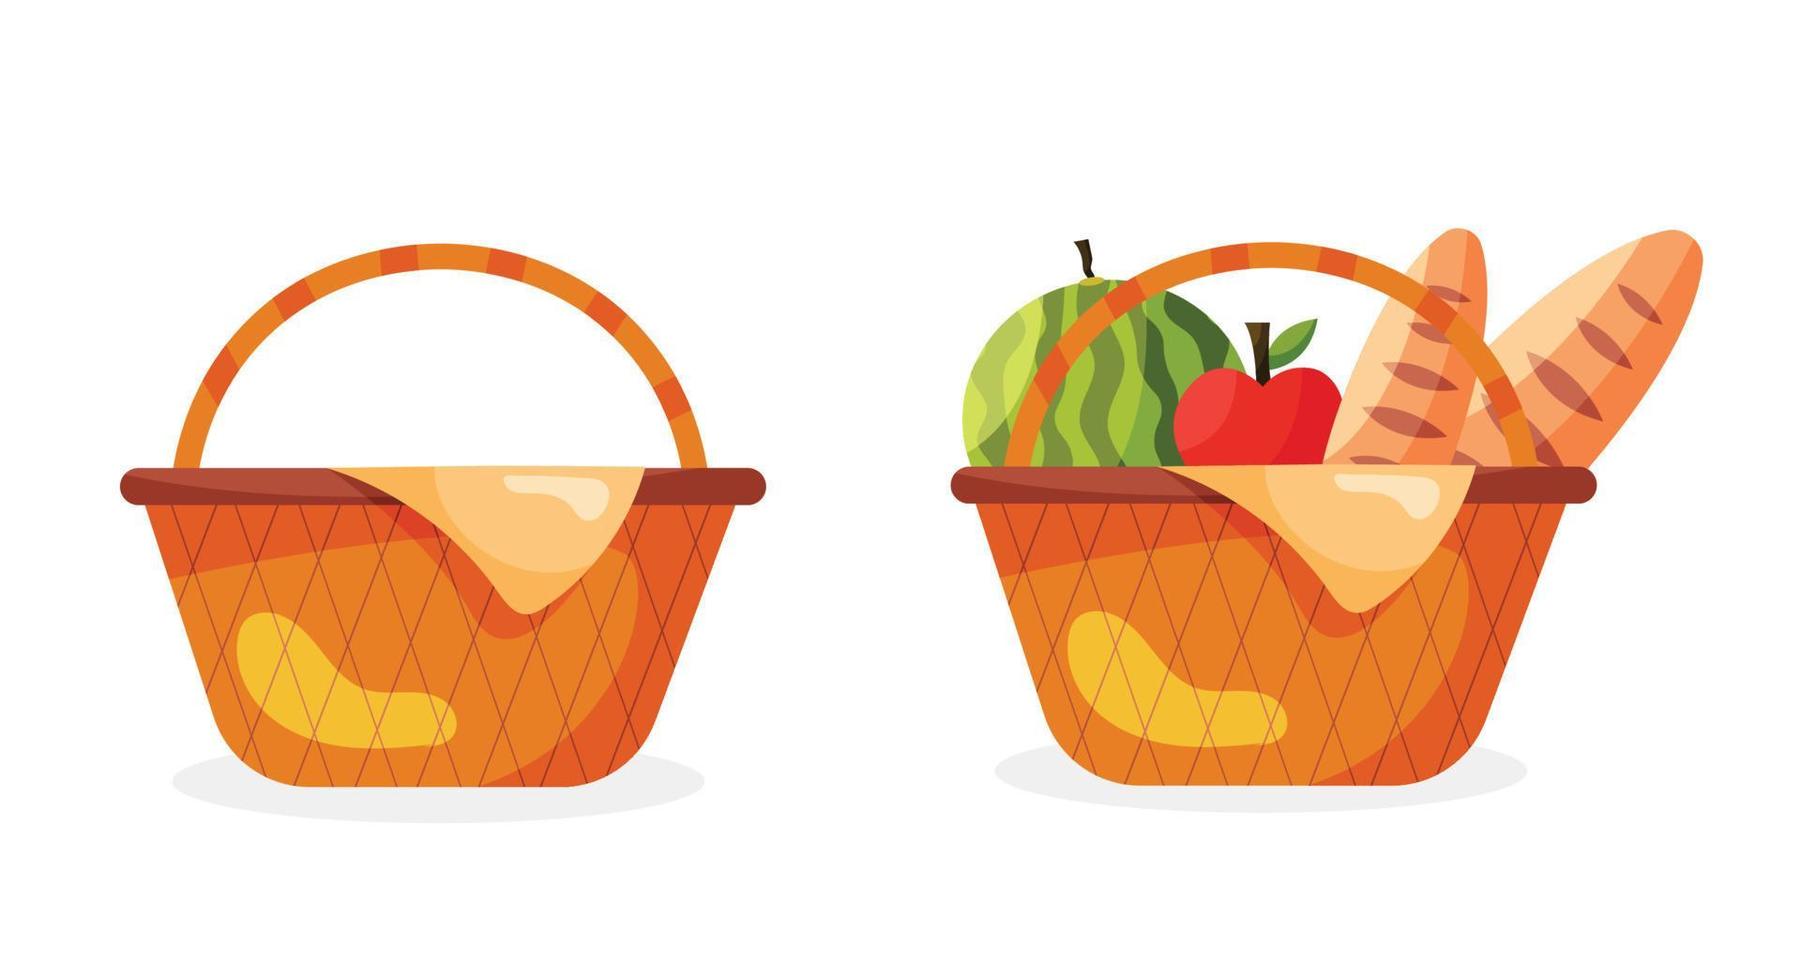 Picnic baskets straw isolated vector illustration